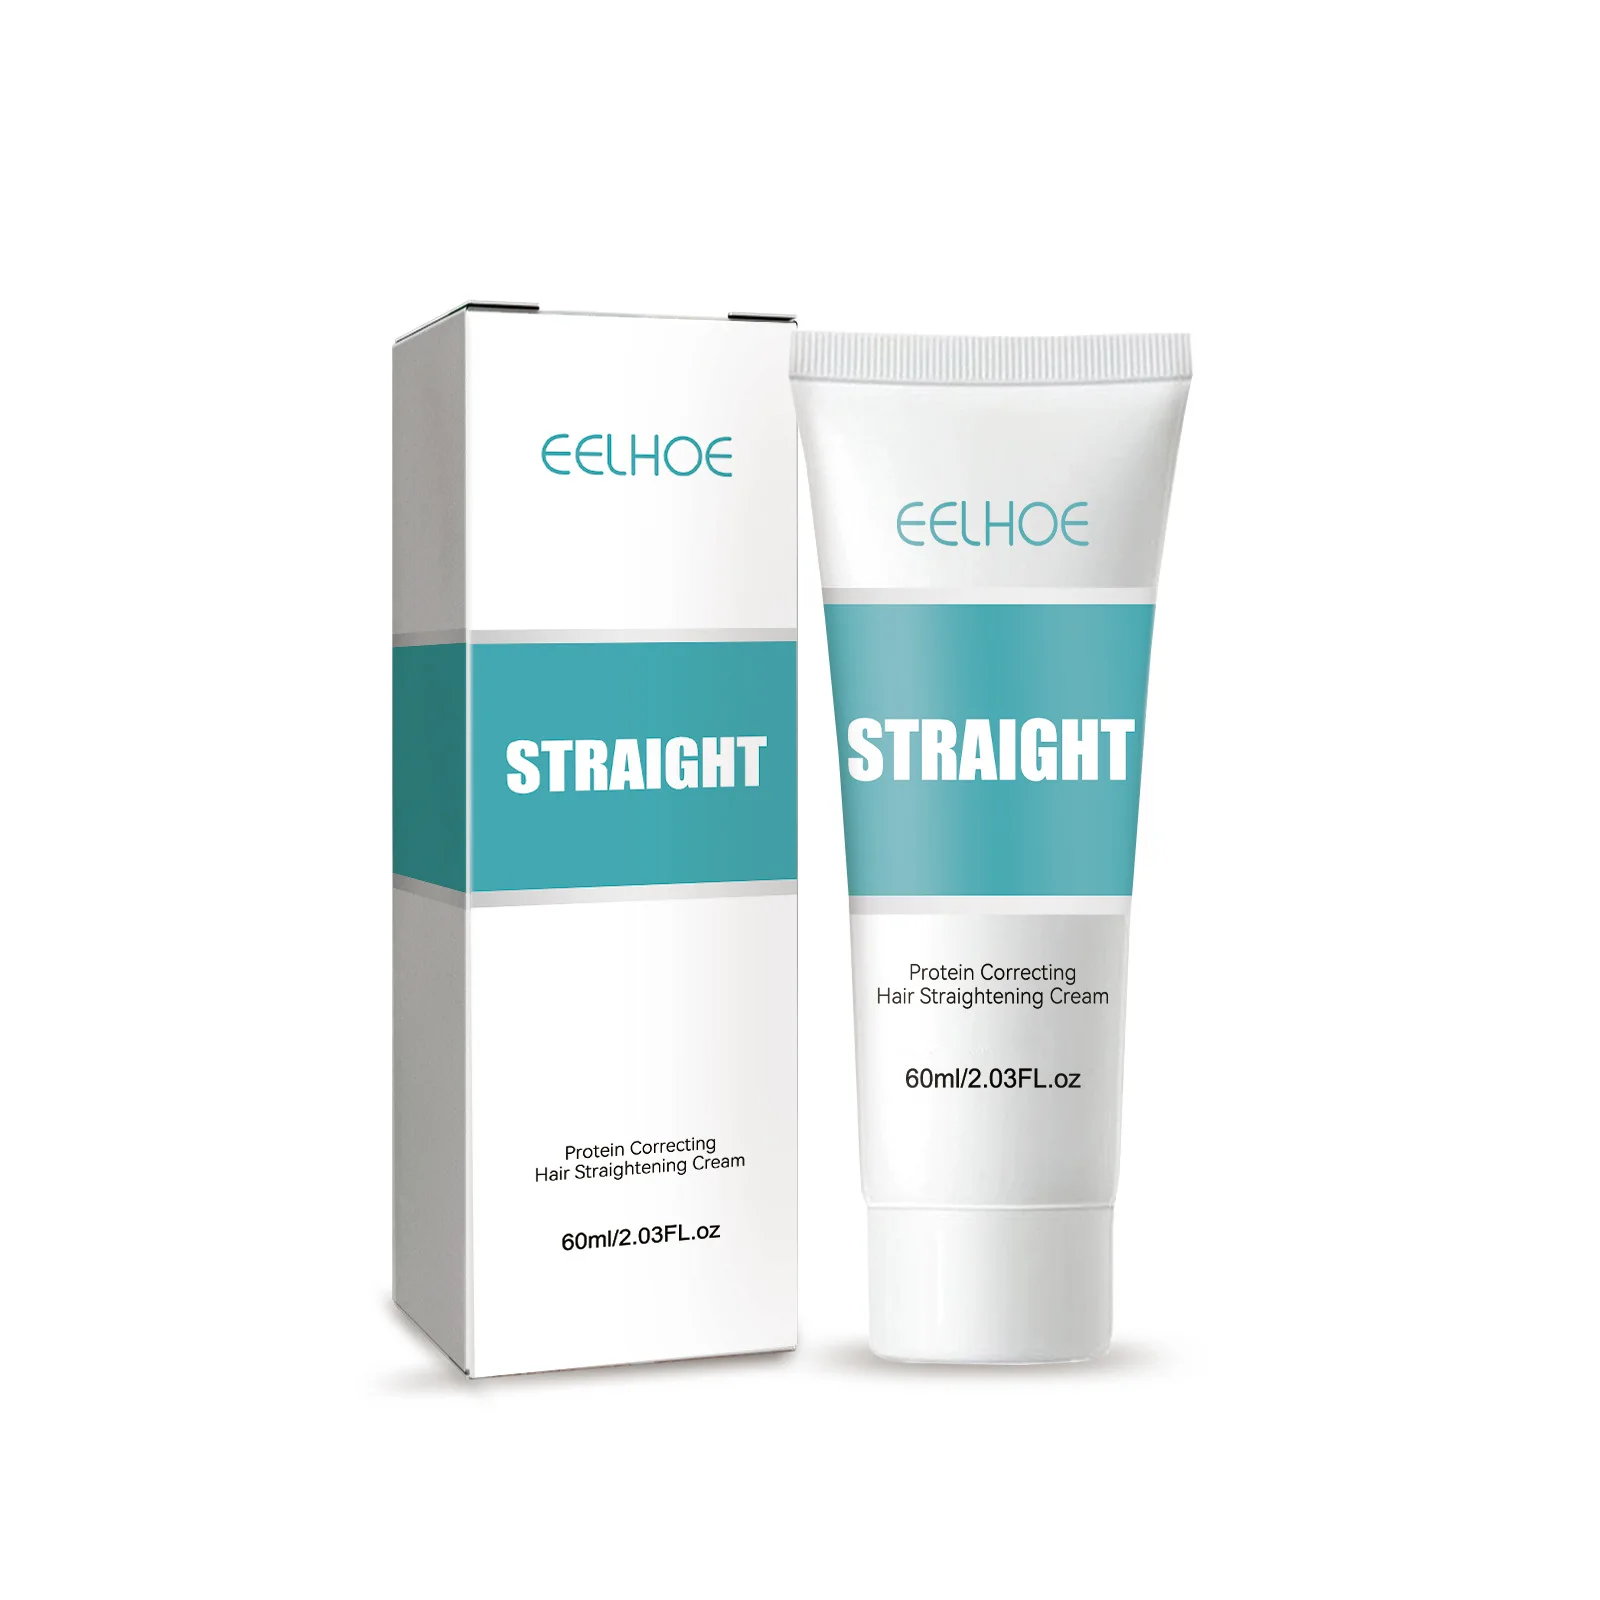 Lock Your Straight Hair in Place with EELHOE Straightening Cream - Say Goodbye to Frizz and Tangles guitar fret bender zinc alloy with plastic handle luthier tool for bending straightening fret wire